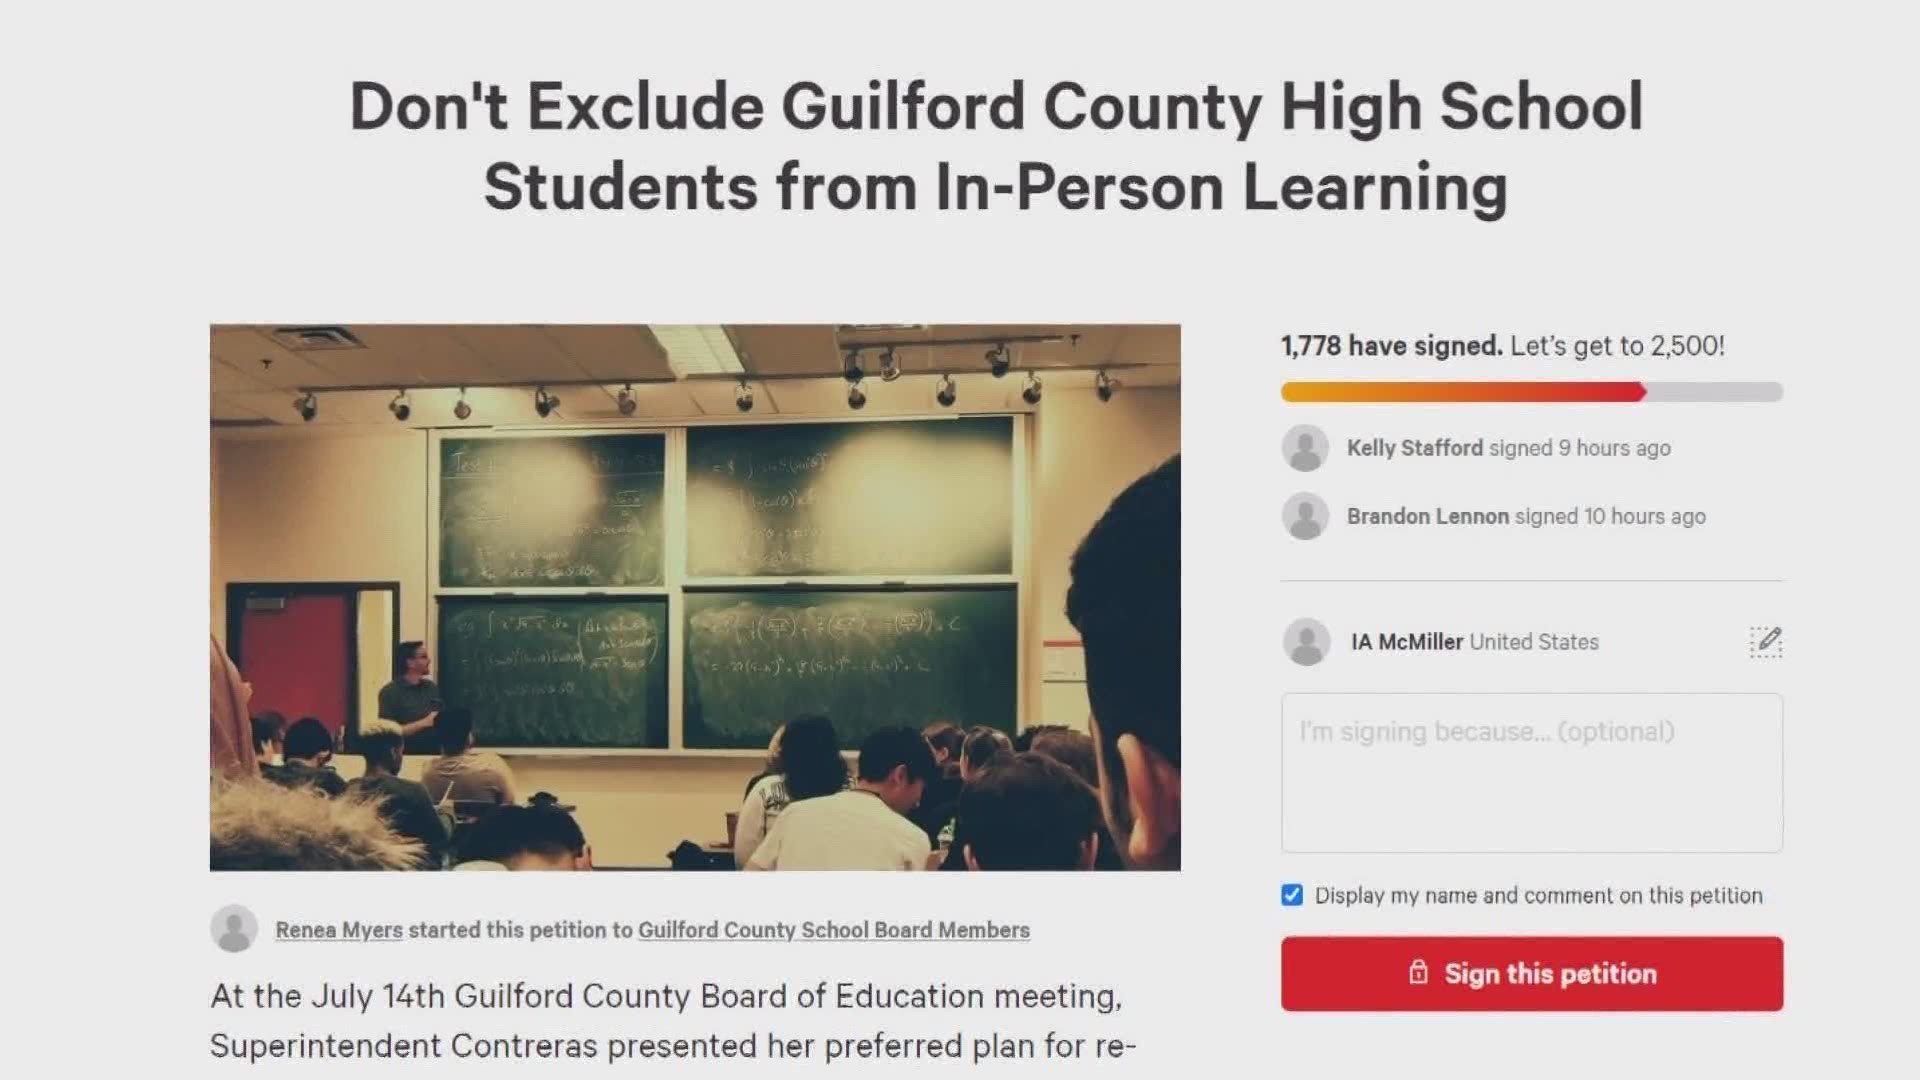 One parent started an online petition. She said she hopes school leaders take it into account.